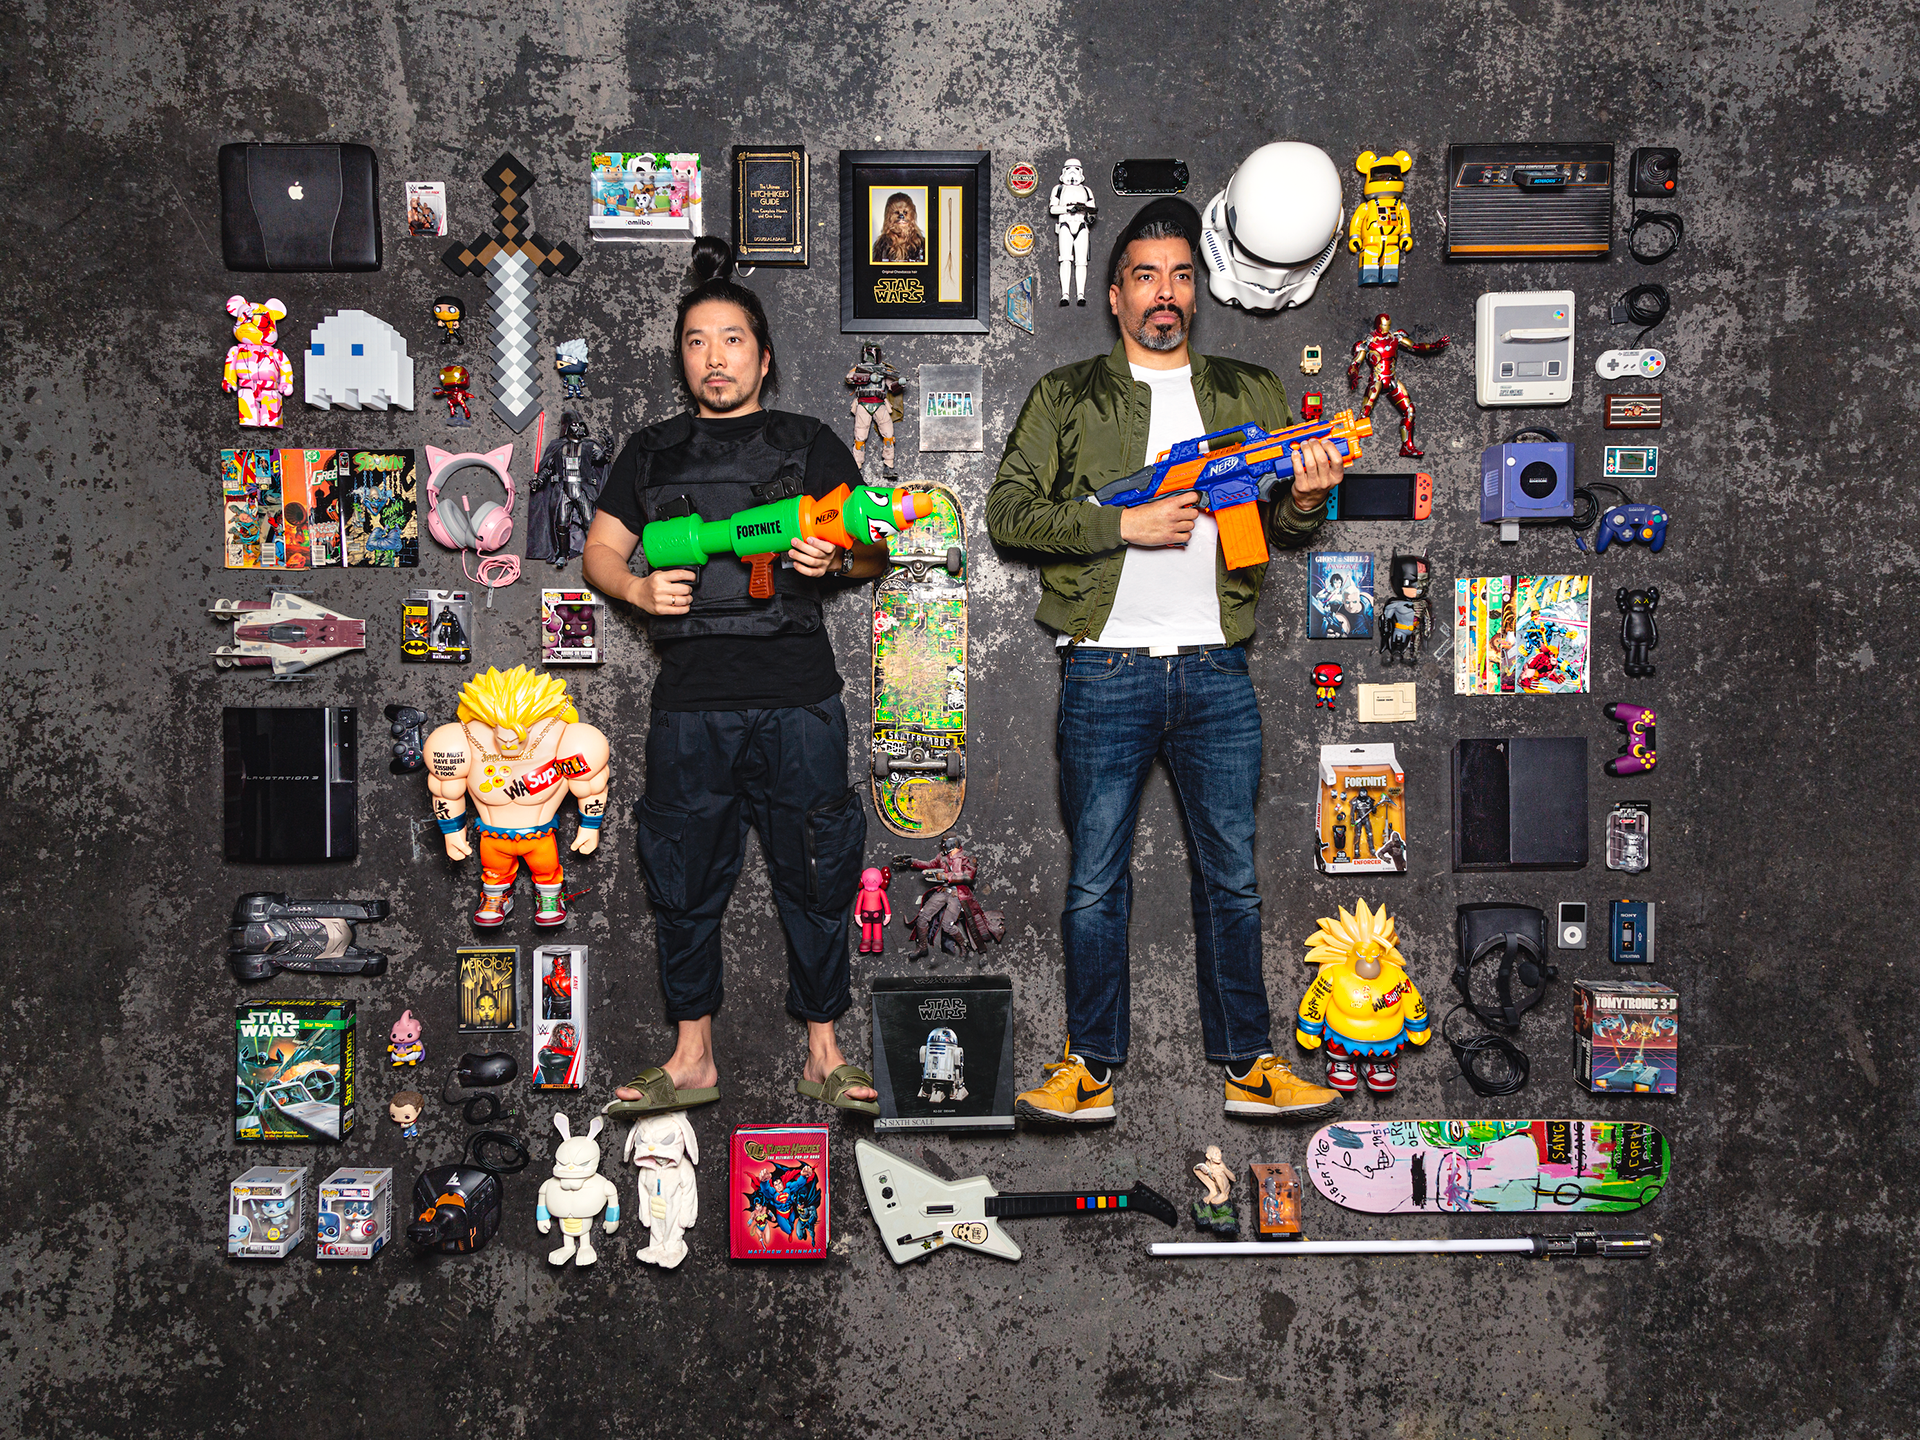 Picture of the managing directors of Jung von Matt NERD, André Price and Toan Nguyen, lying on the floor between toys and holding two Nerf pistols.